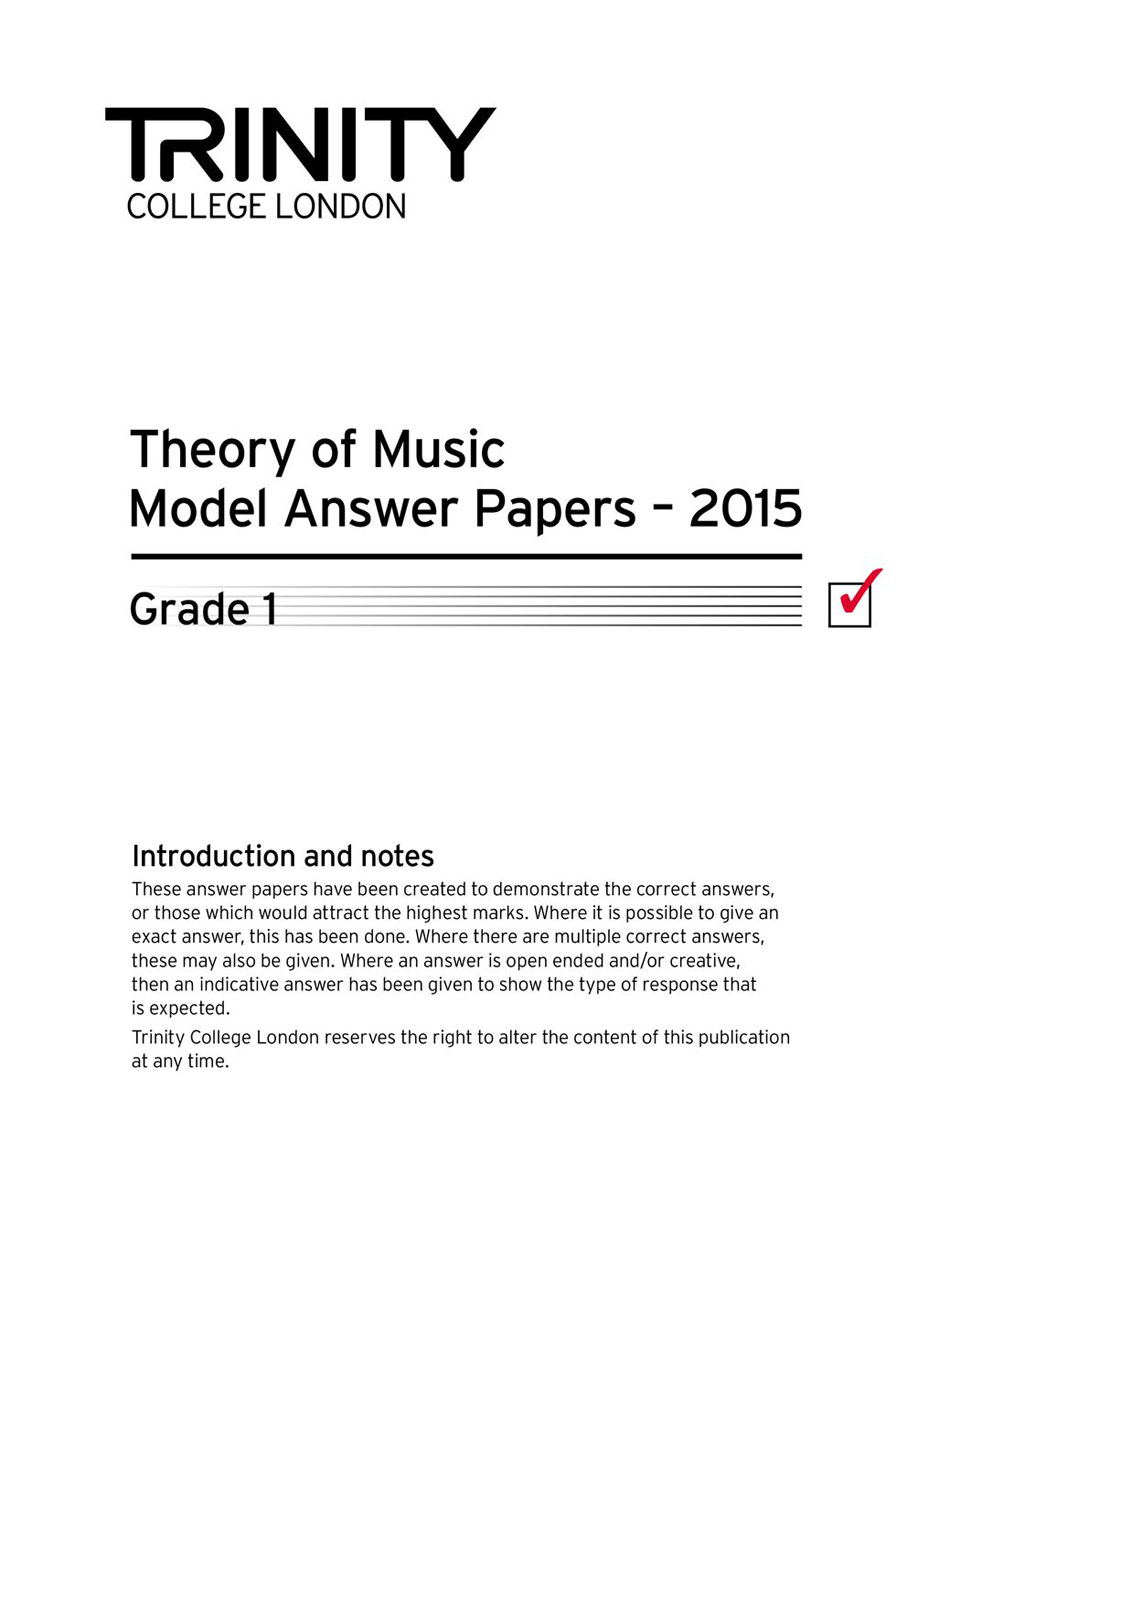 TRINITY GUILDHALL TRINITY COLLEGE LONDON THEORY MODEL ANSWERS PAPER (2015) GRADE 1 ( ALL INSTRUMENTS)